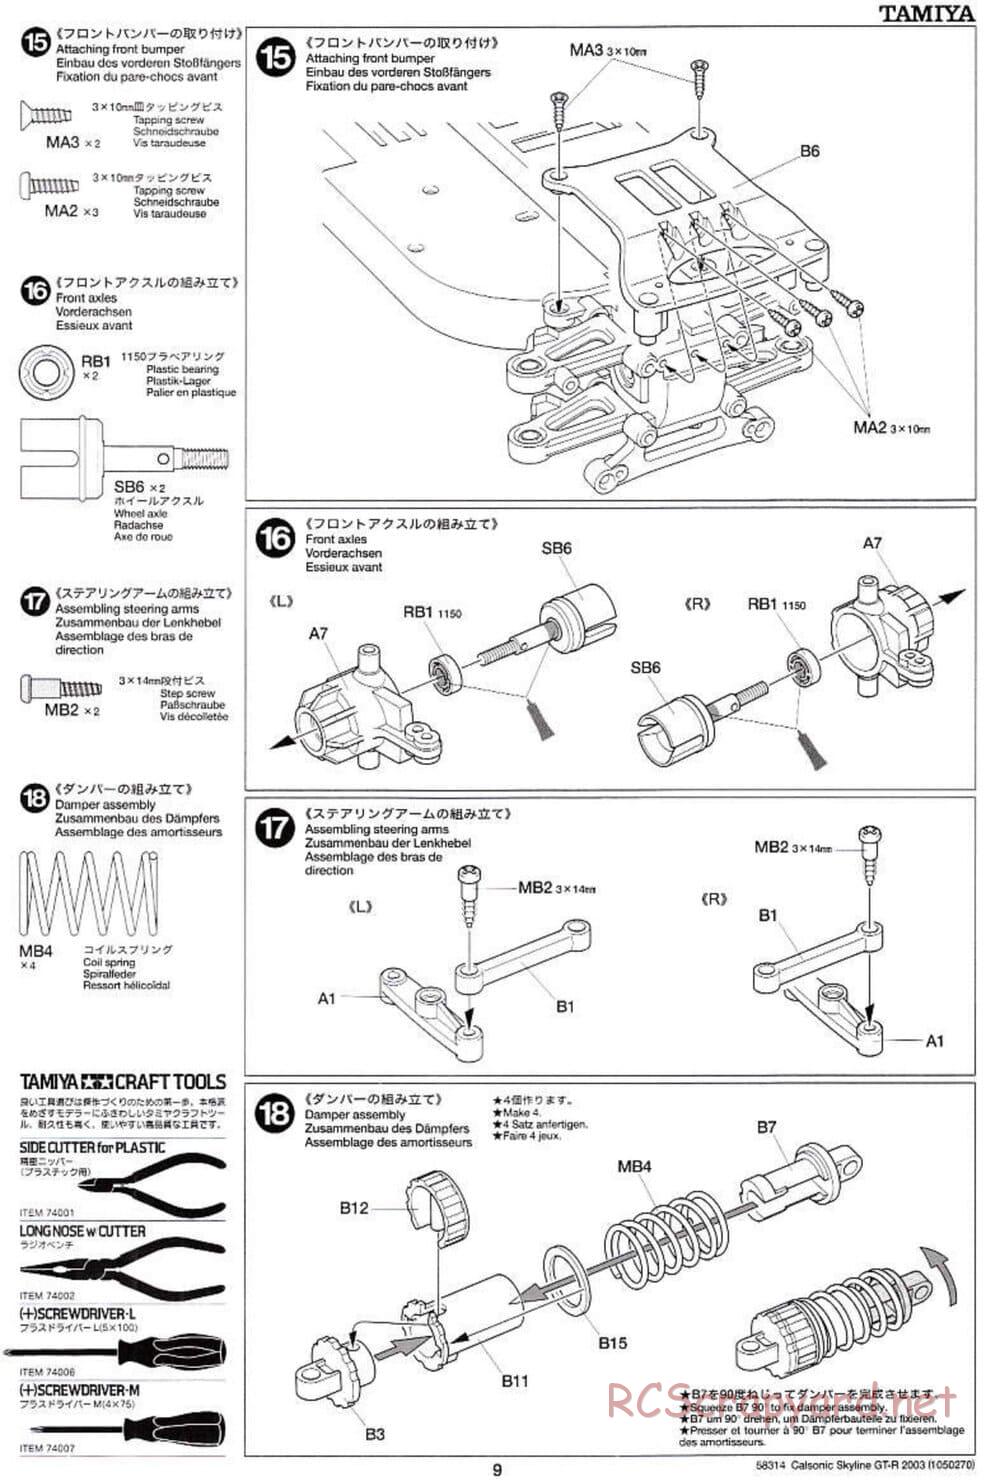 Tamiya - Calsonic Skyline GT-R 2003 - TT-01 Chassis - Manual - Page 9